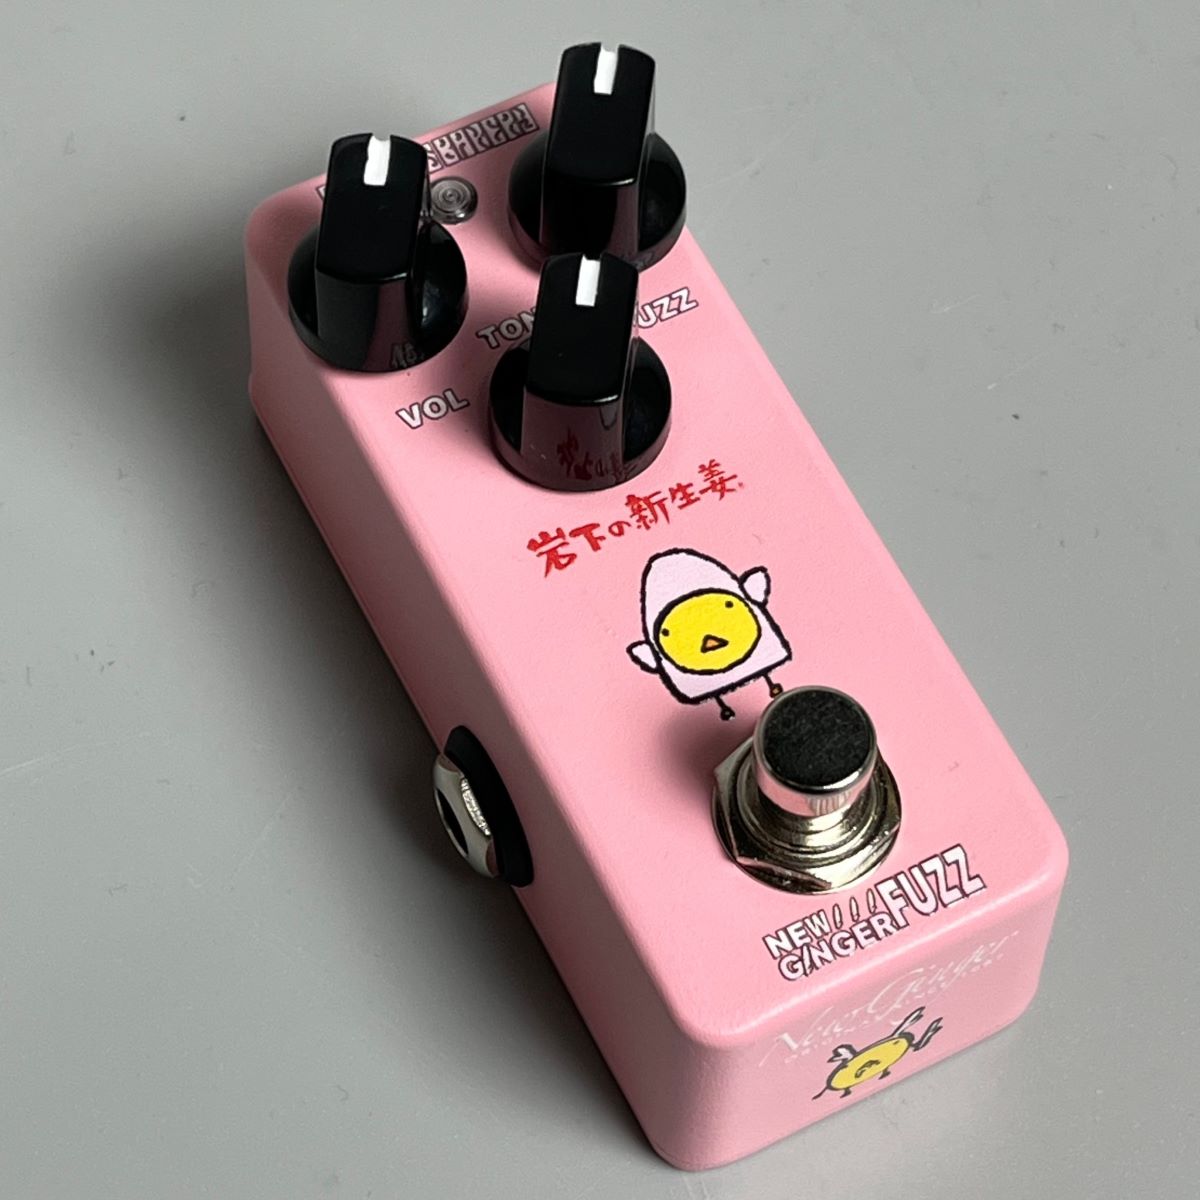 Effects Bakery NEW GINGER FUZZ コンパクトエフェクター ファズ【岩下 